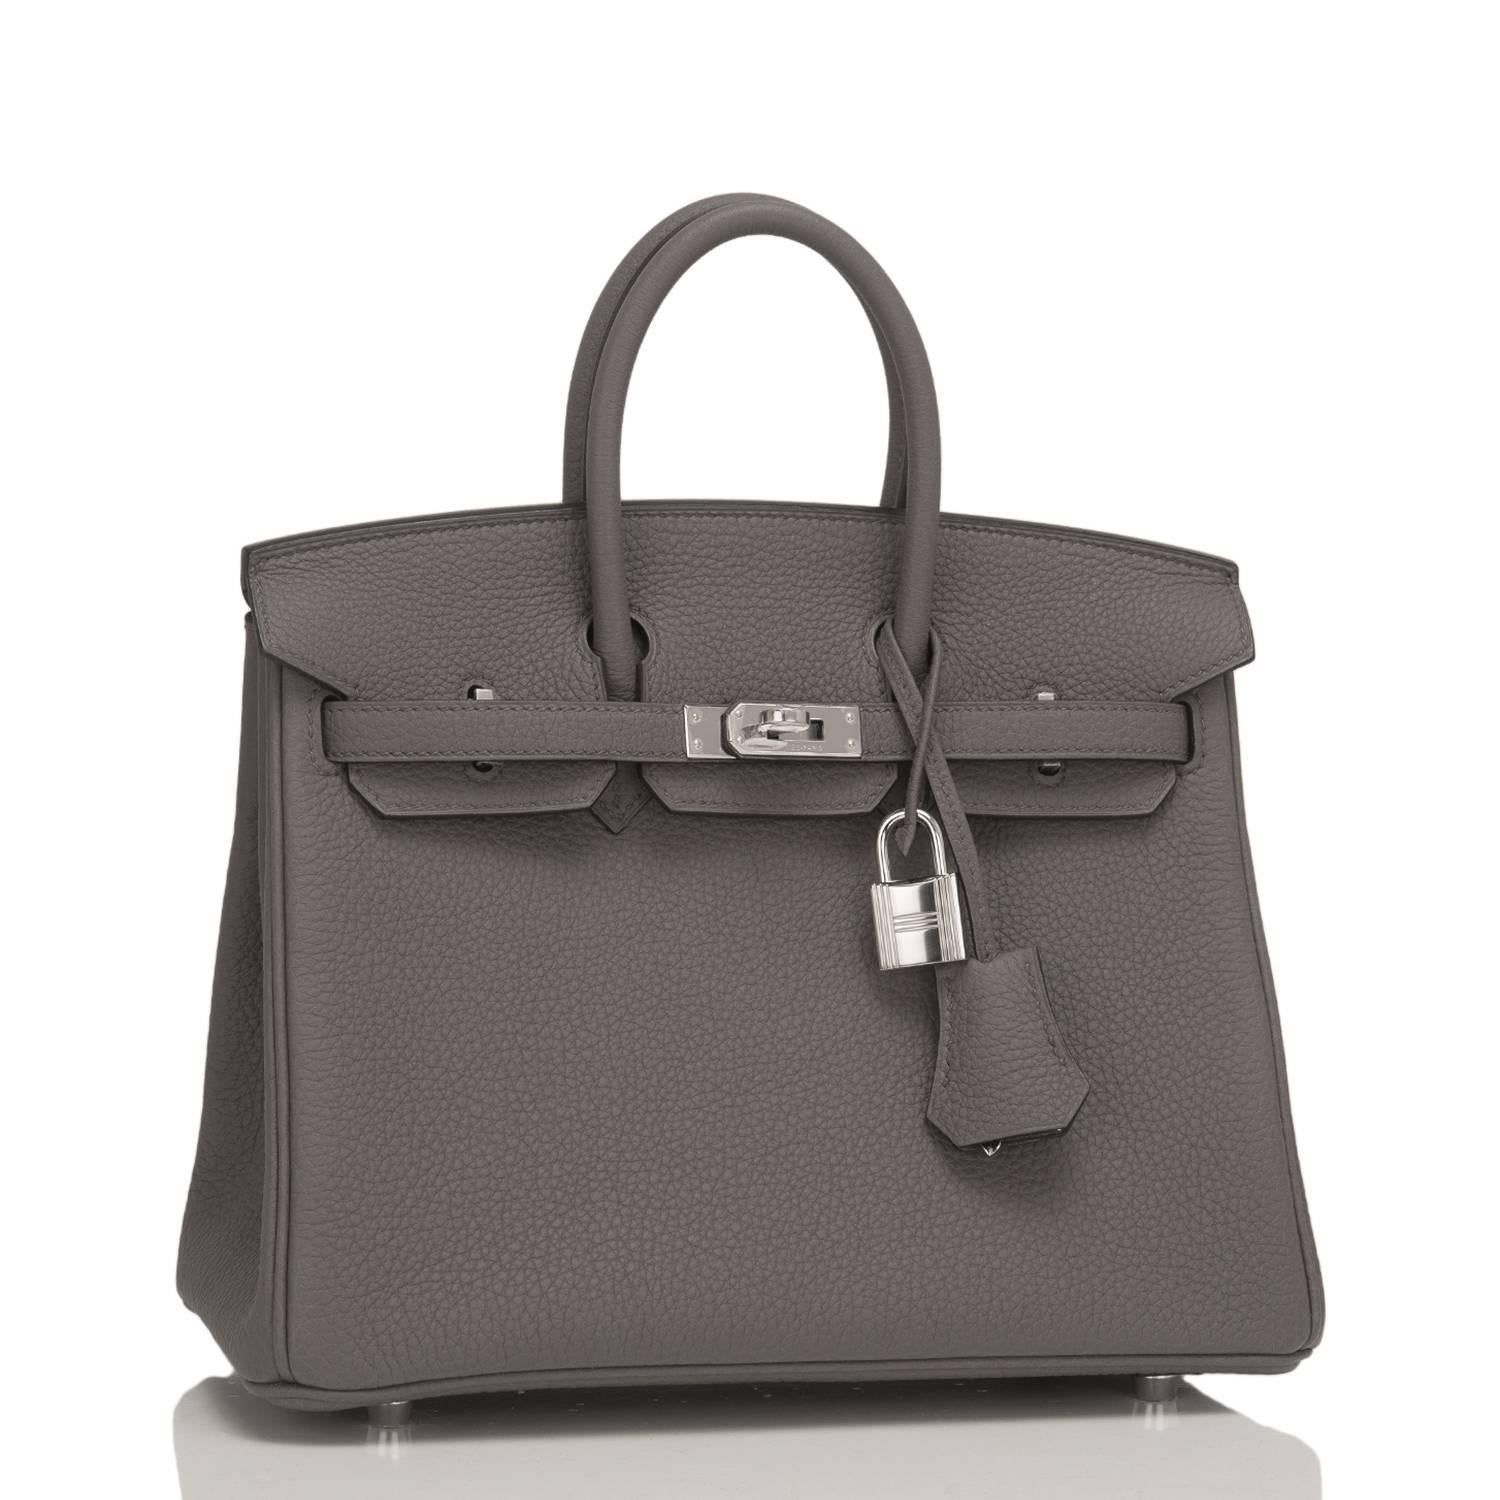 Hermes Etain Birkin 25cm of togo leather with palladium hardware.

This Birkin has tonal stitching, a front toggle closure, a clochette with lock and two keys, and double rolled handles.

The interior is lined with Etain chevre and has one zip